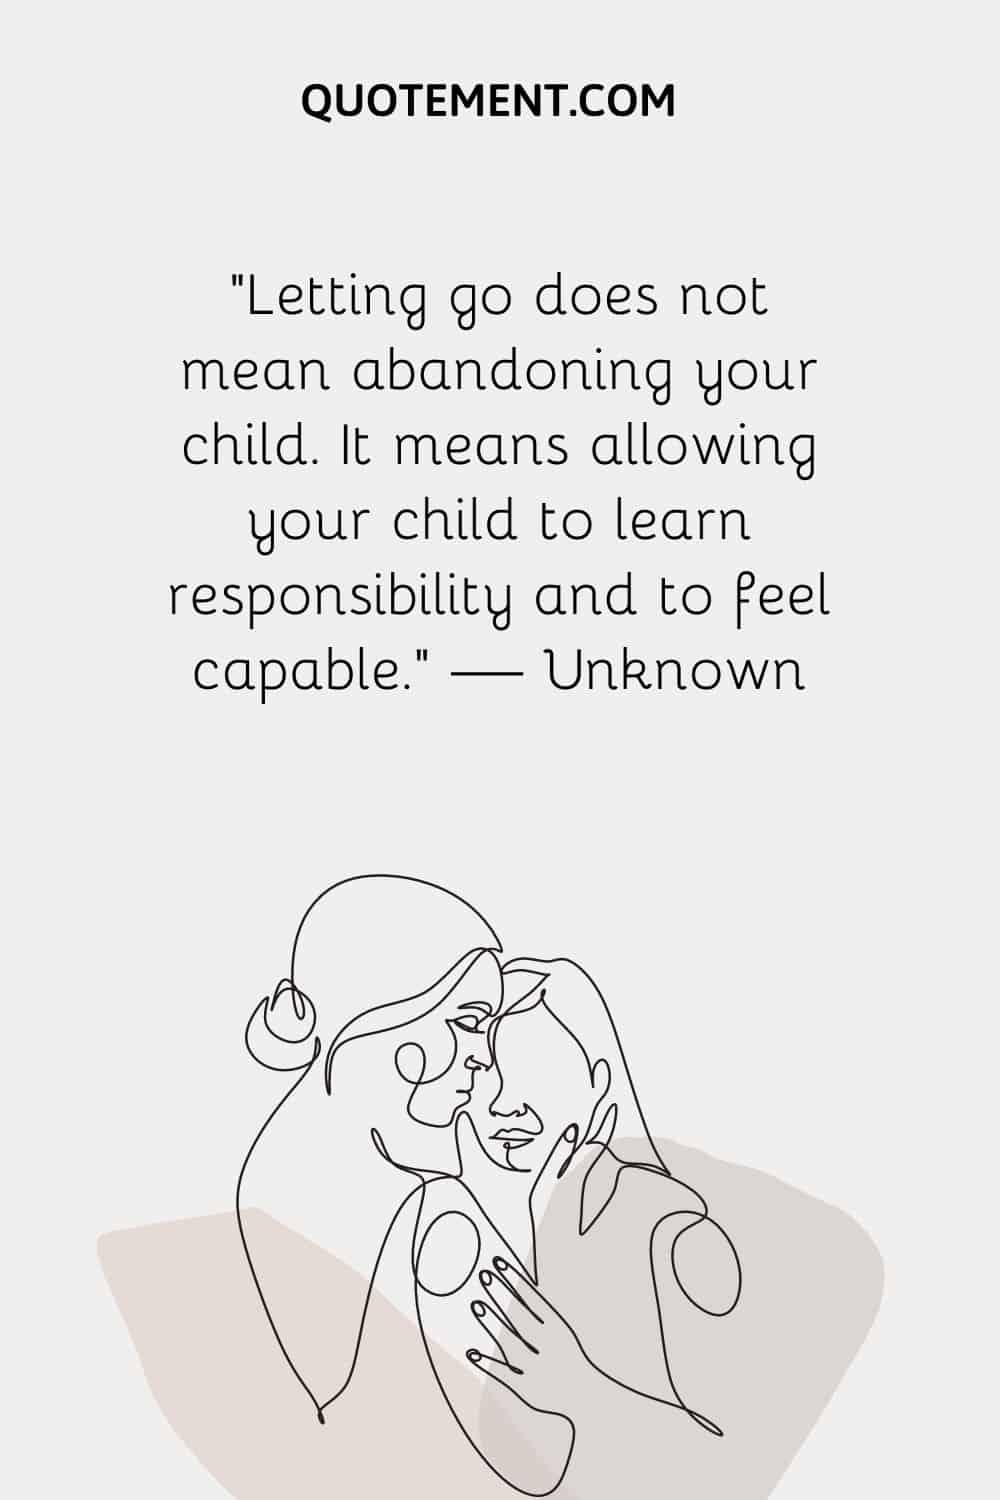 “Letting go does not mean abandoning your child. It means allowing your child to learn responsibility and to feel capable.” — Unknown